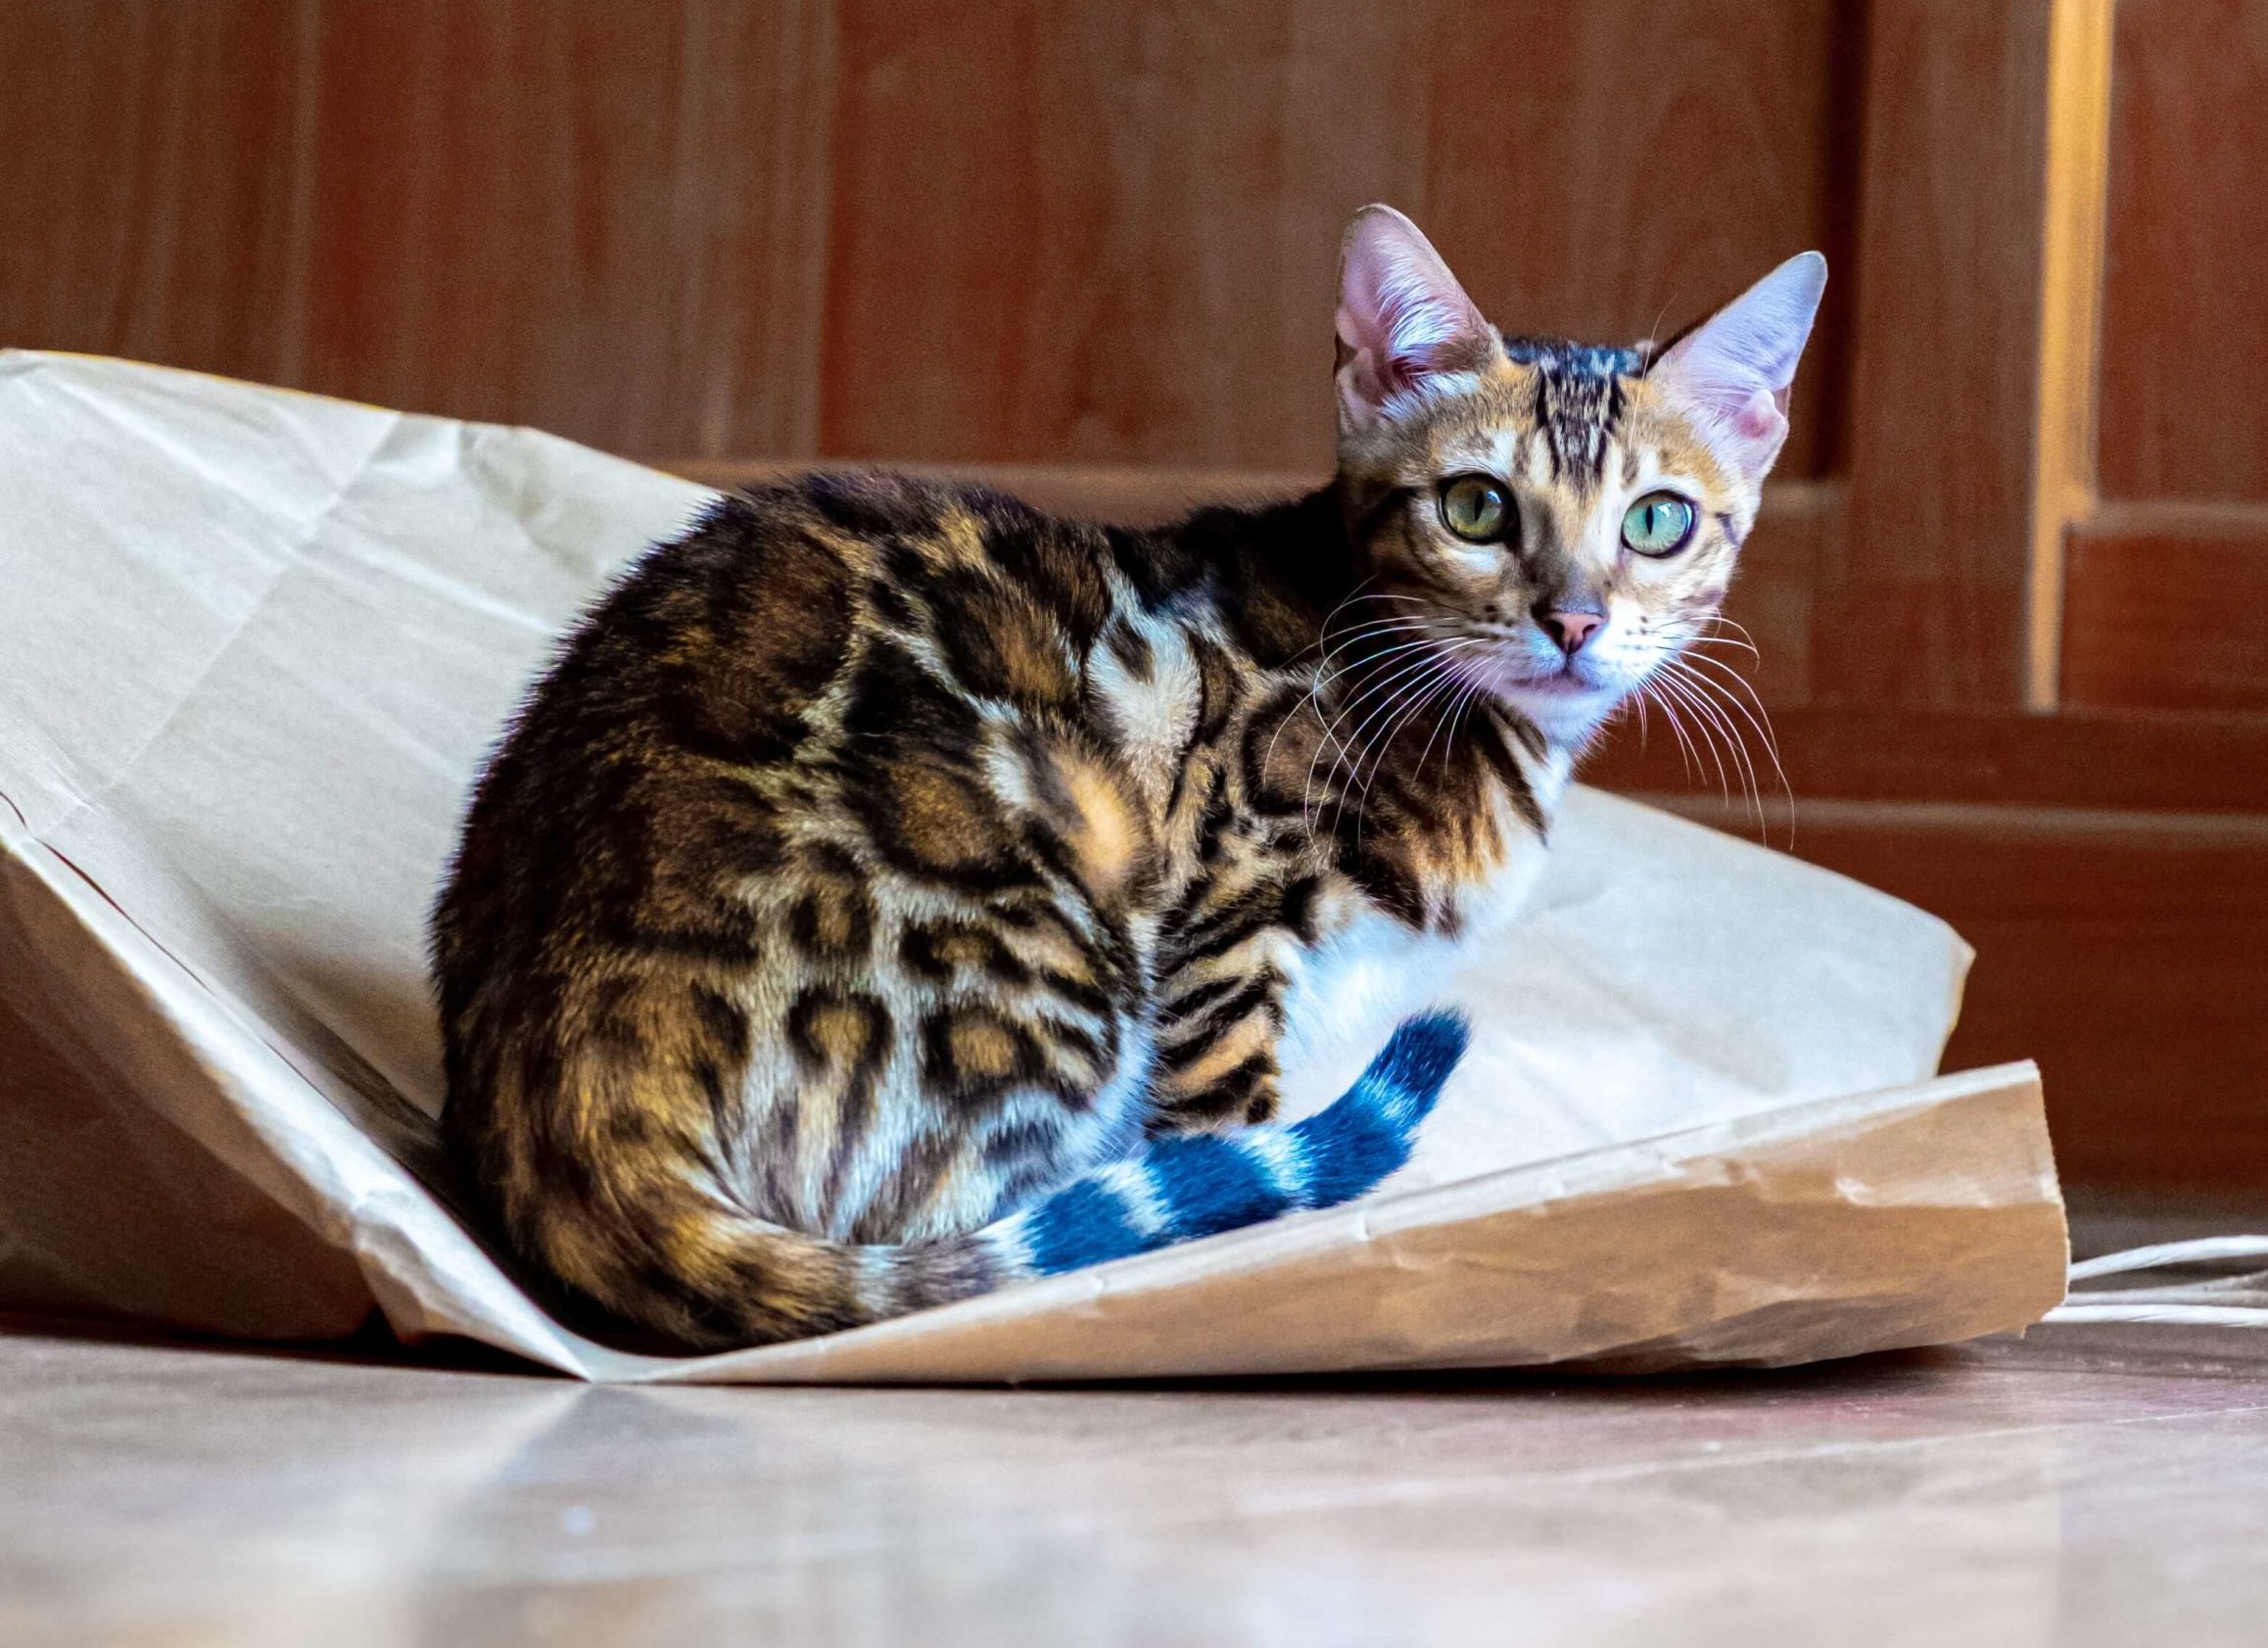 What Do Bengal Cats Look Like?